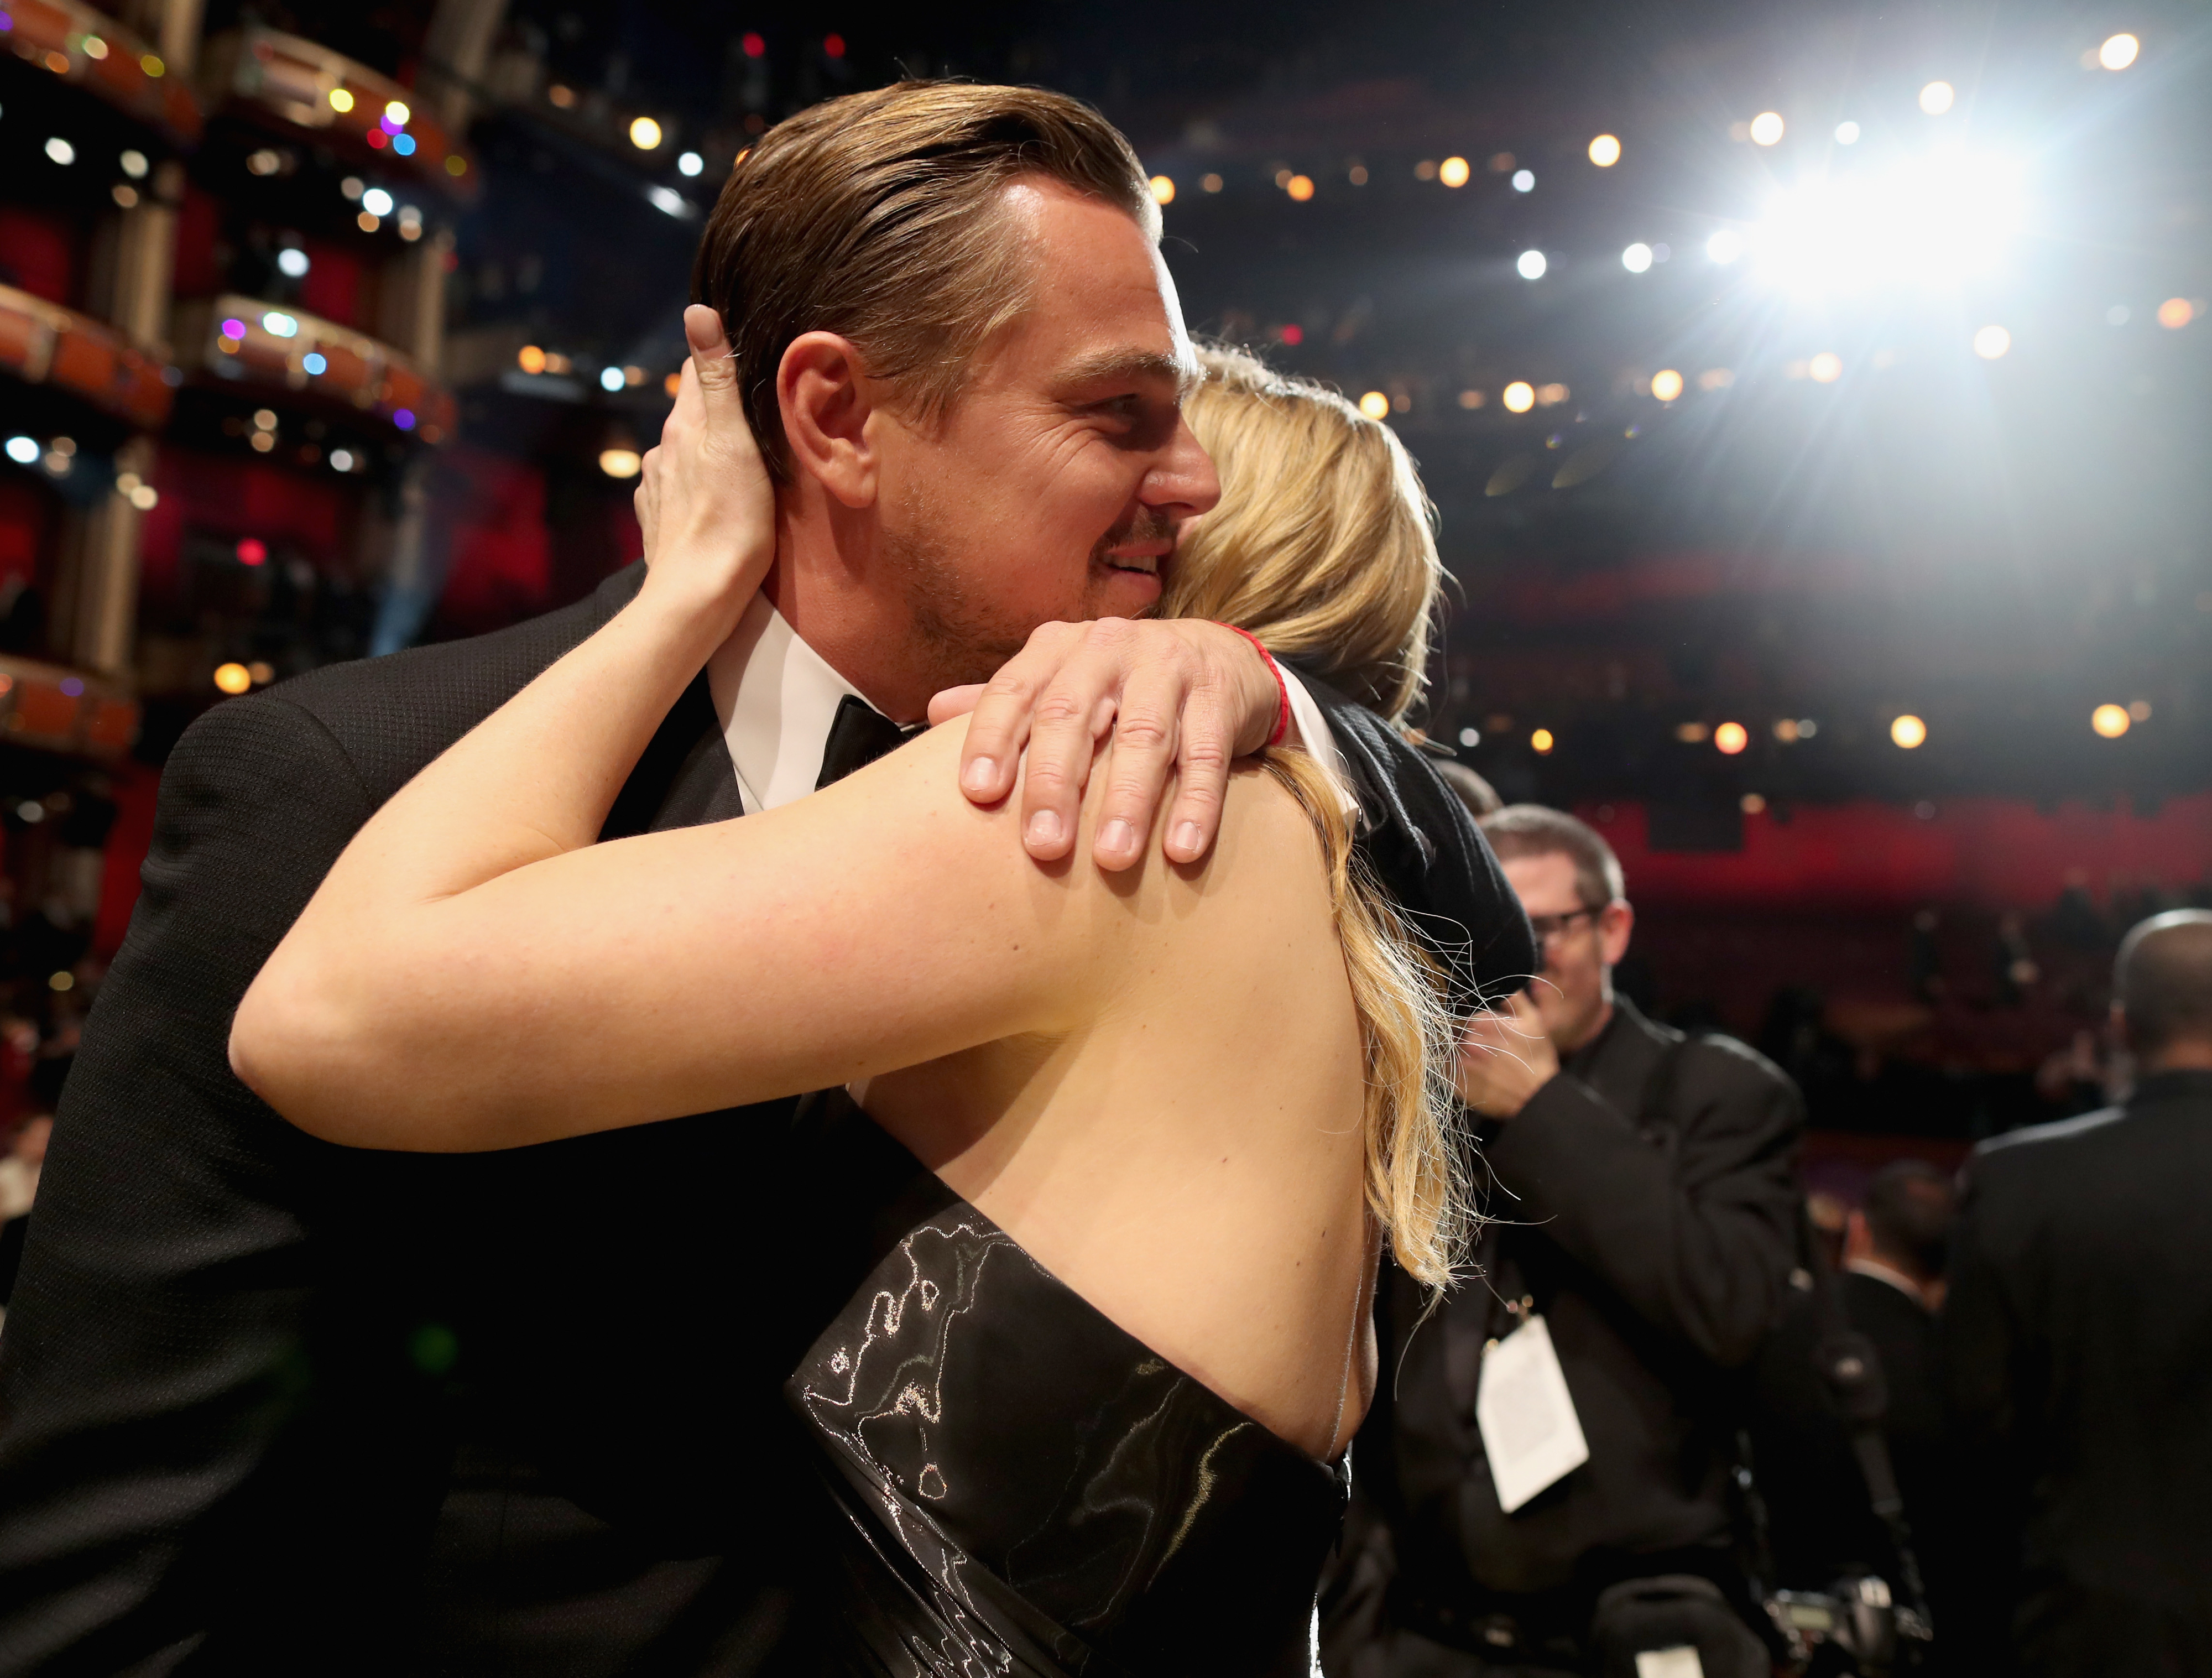 Kate and Leo embracing at an event